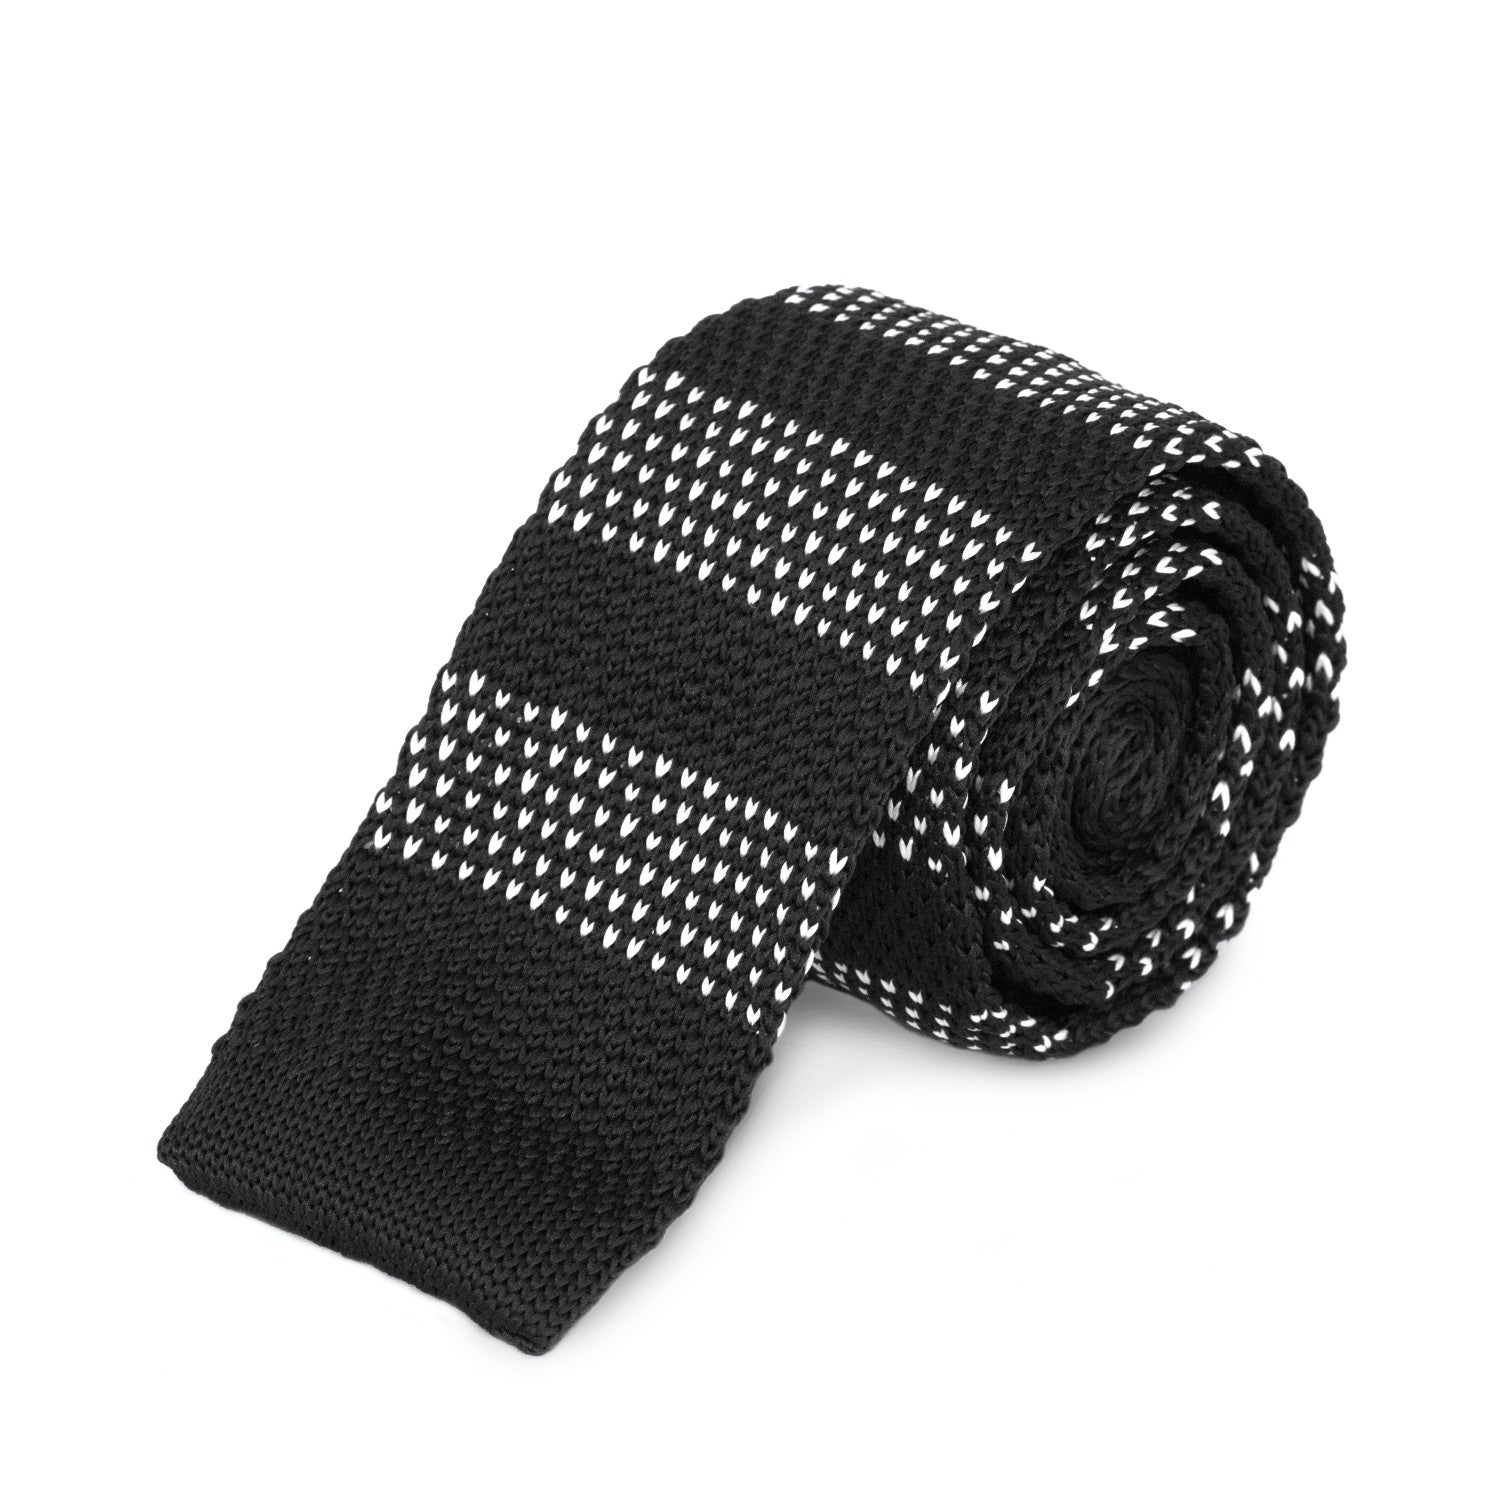 Black and White Stripe Knitted Tie